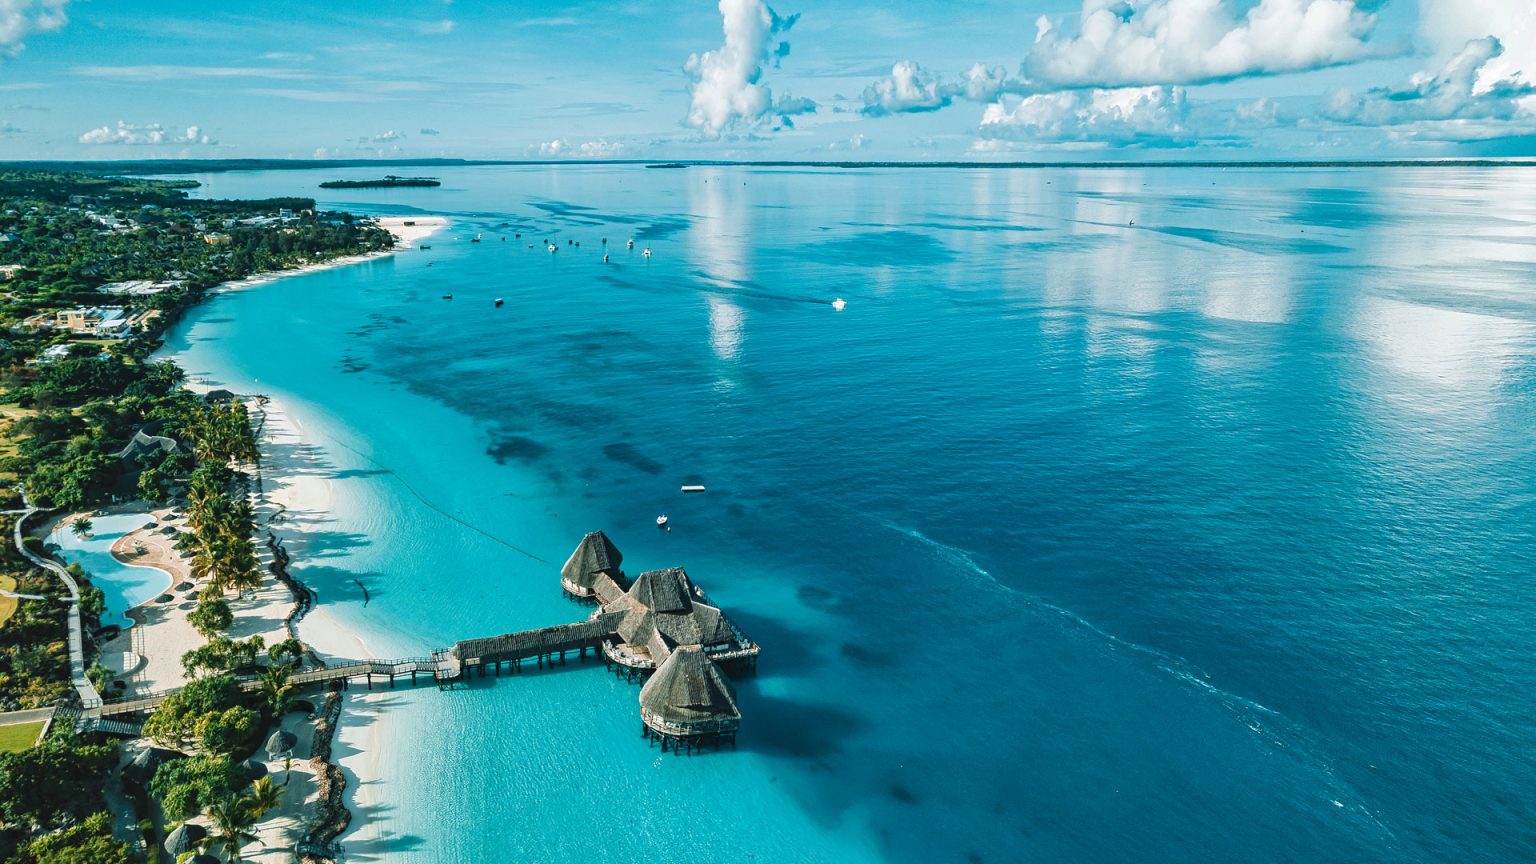 To promote its blue economy, Zanzibar recently started leasing out small islets surrounding the main archipelago and has already pocketed US$15 million in advance leasing fees for some ten islets. Photo/andBeyond